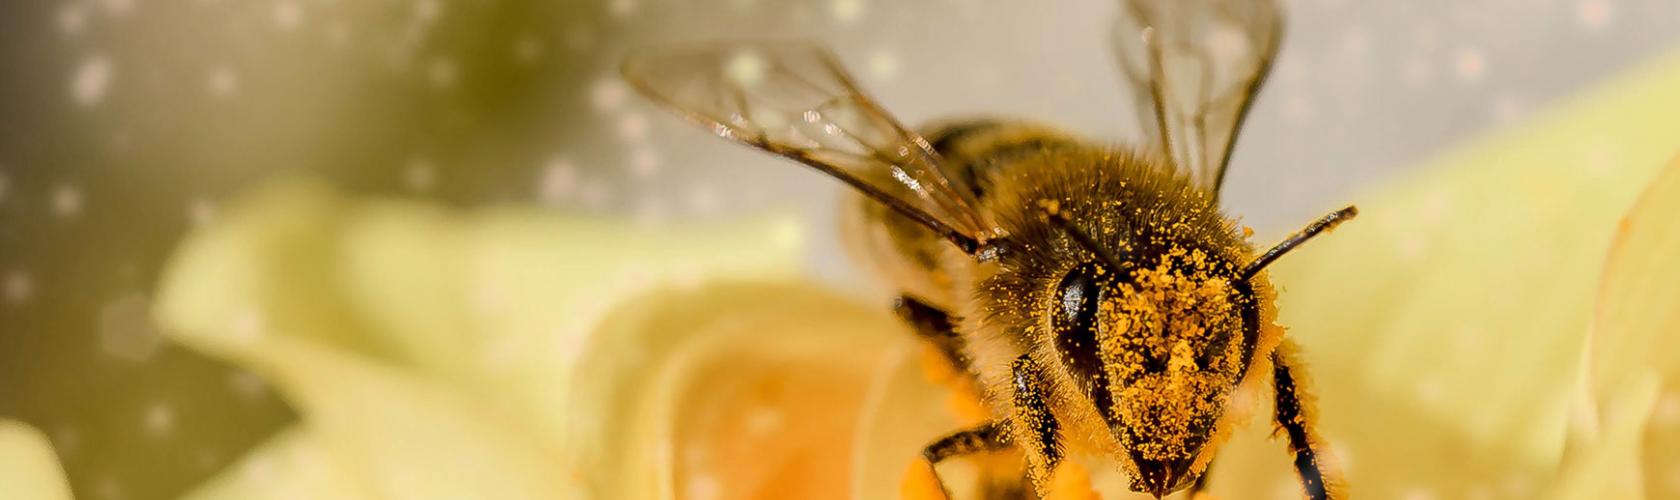 Apitherapy is a therapeutic method using bee products for medical purposes.